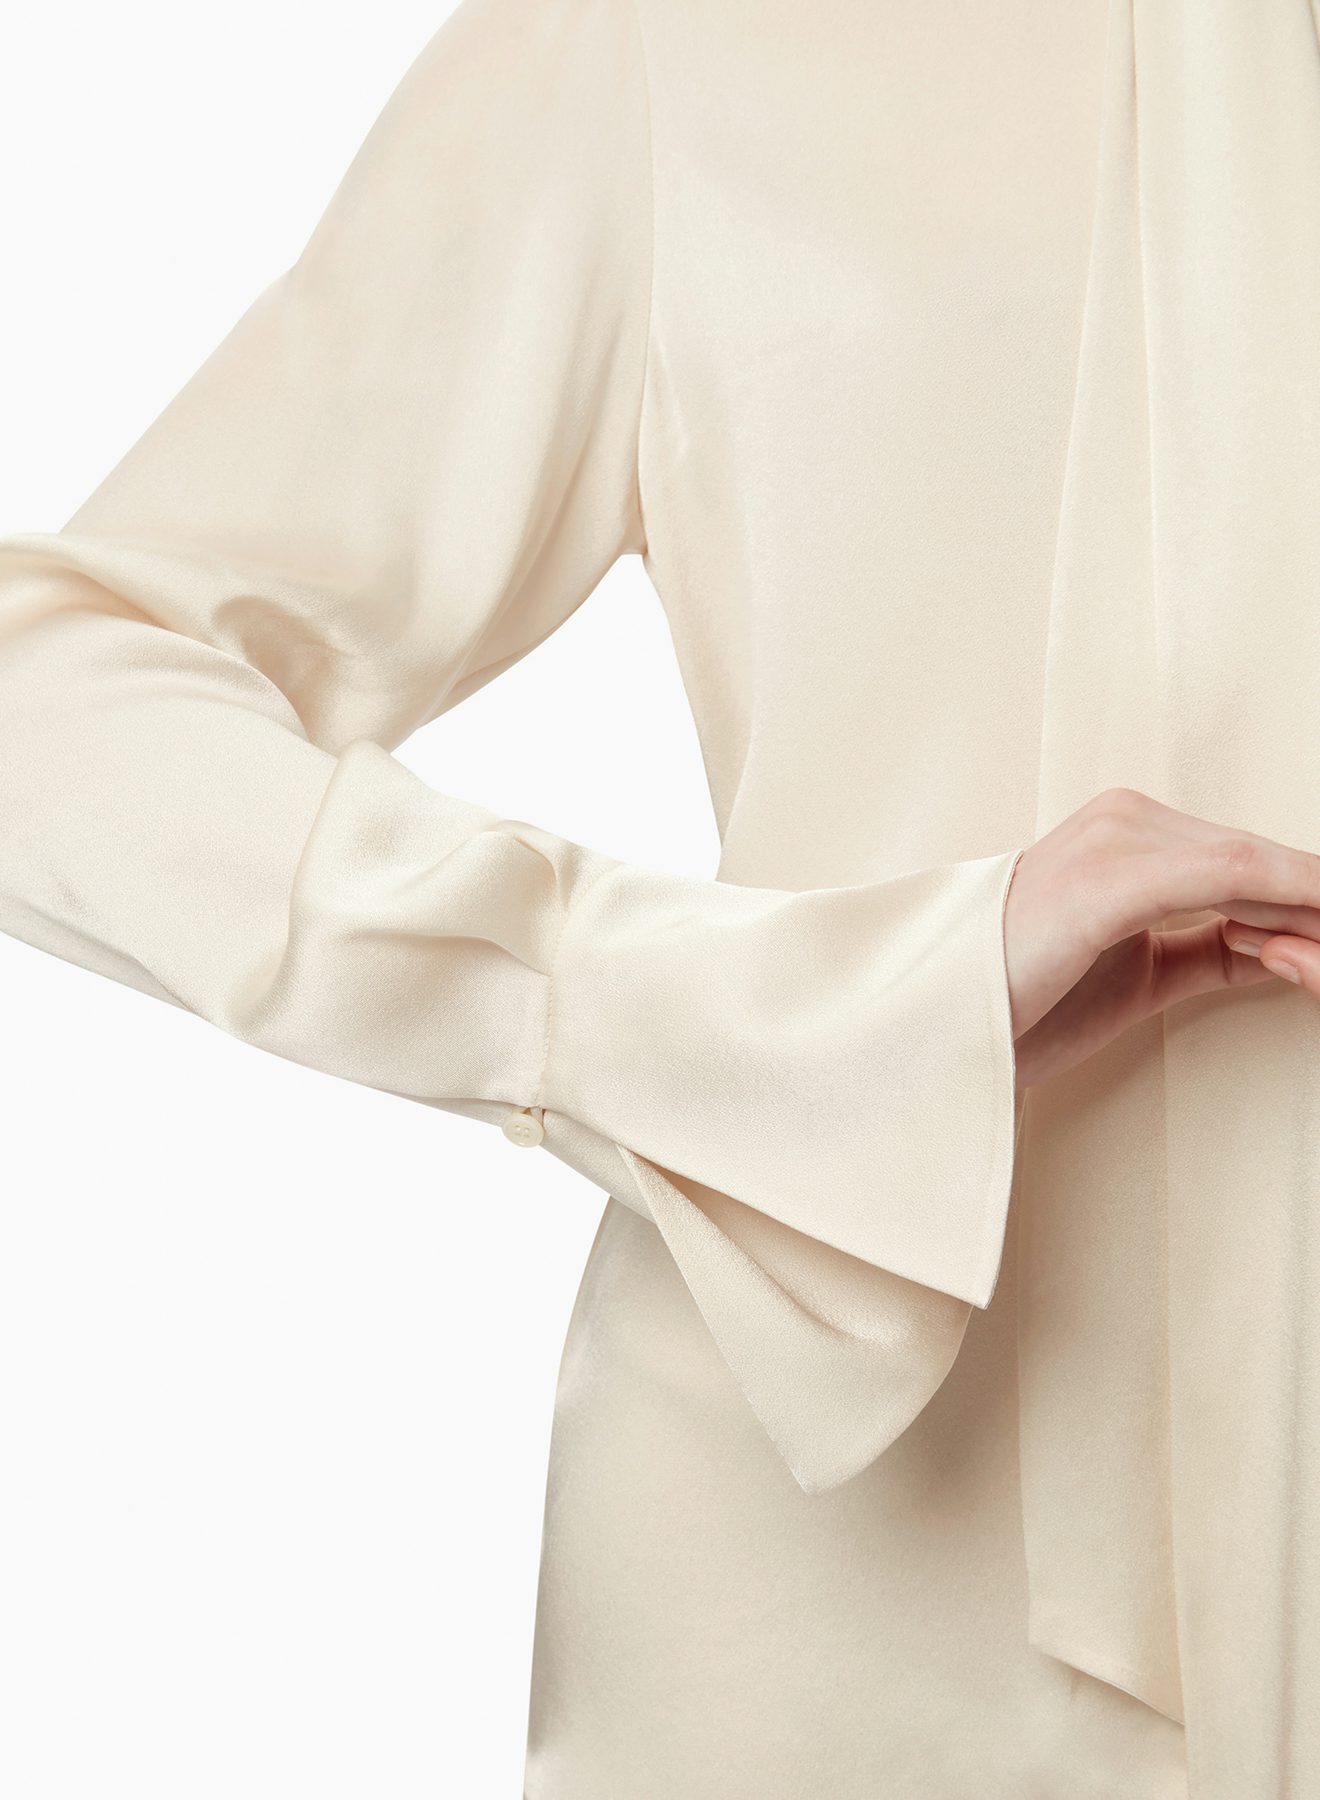 Satin Blouse With Neck-tie Champagne - Nina Ricci